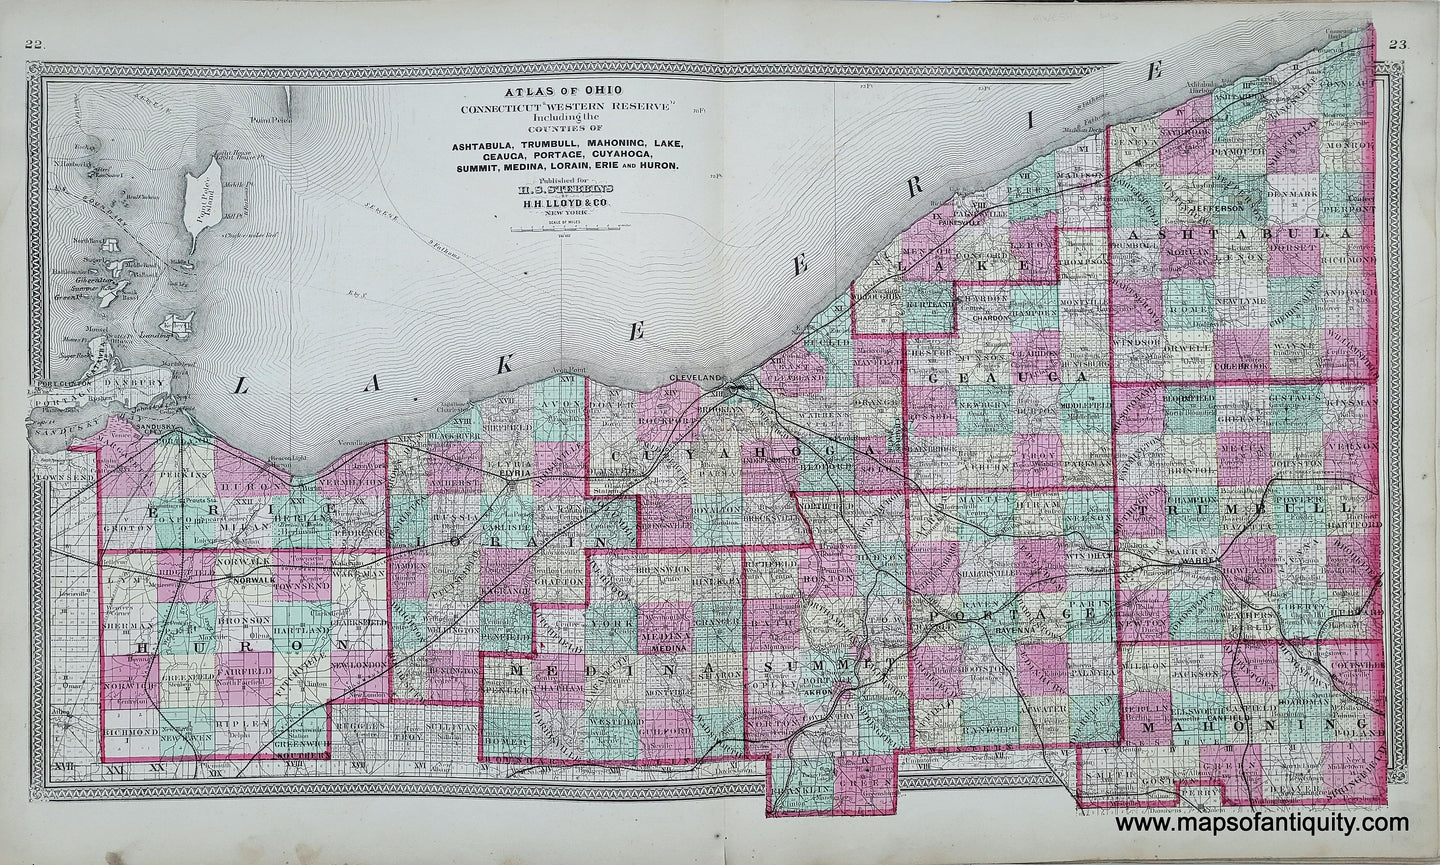 Genuine-Antique-Hand-colored-Map-Atlas-of-Ohio-Connecticut-Western-Reserve-Including-the-Counties-of-Ashtabula-Trumbull-Mahoning-Lake-Geauga-Portage-Cuyahoga-Summit-Medina-Lorain-Erie-and-Huron--1868-Stebbins-Lloyd-Maps-Of-Antiquity